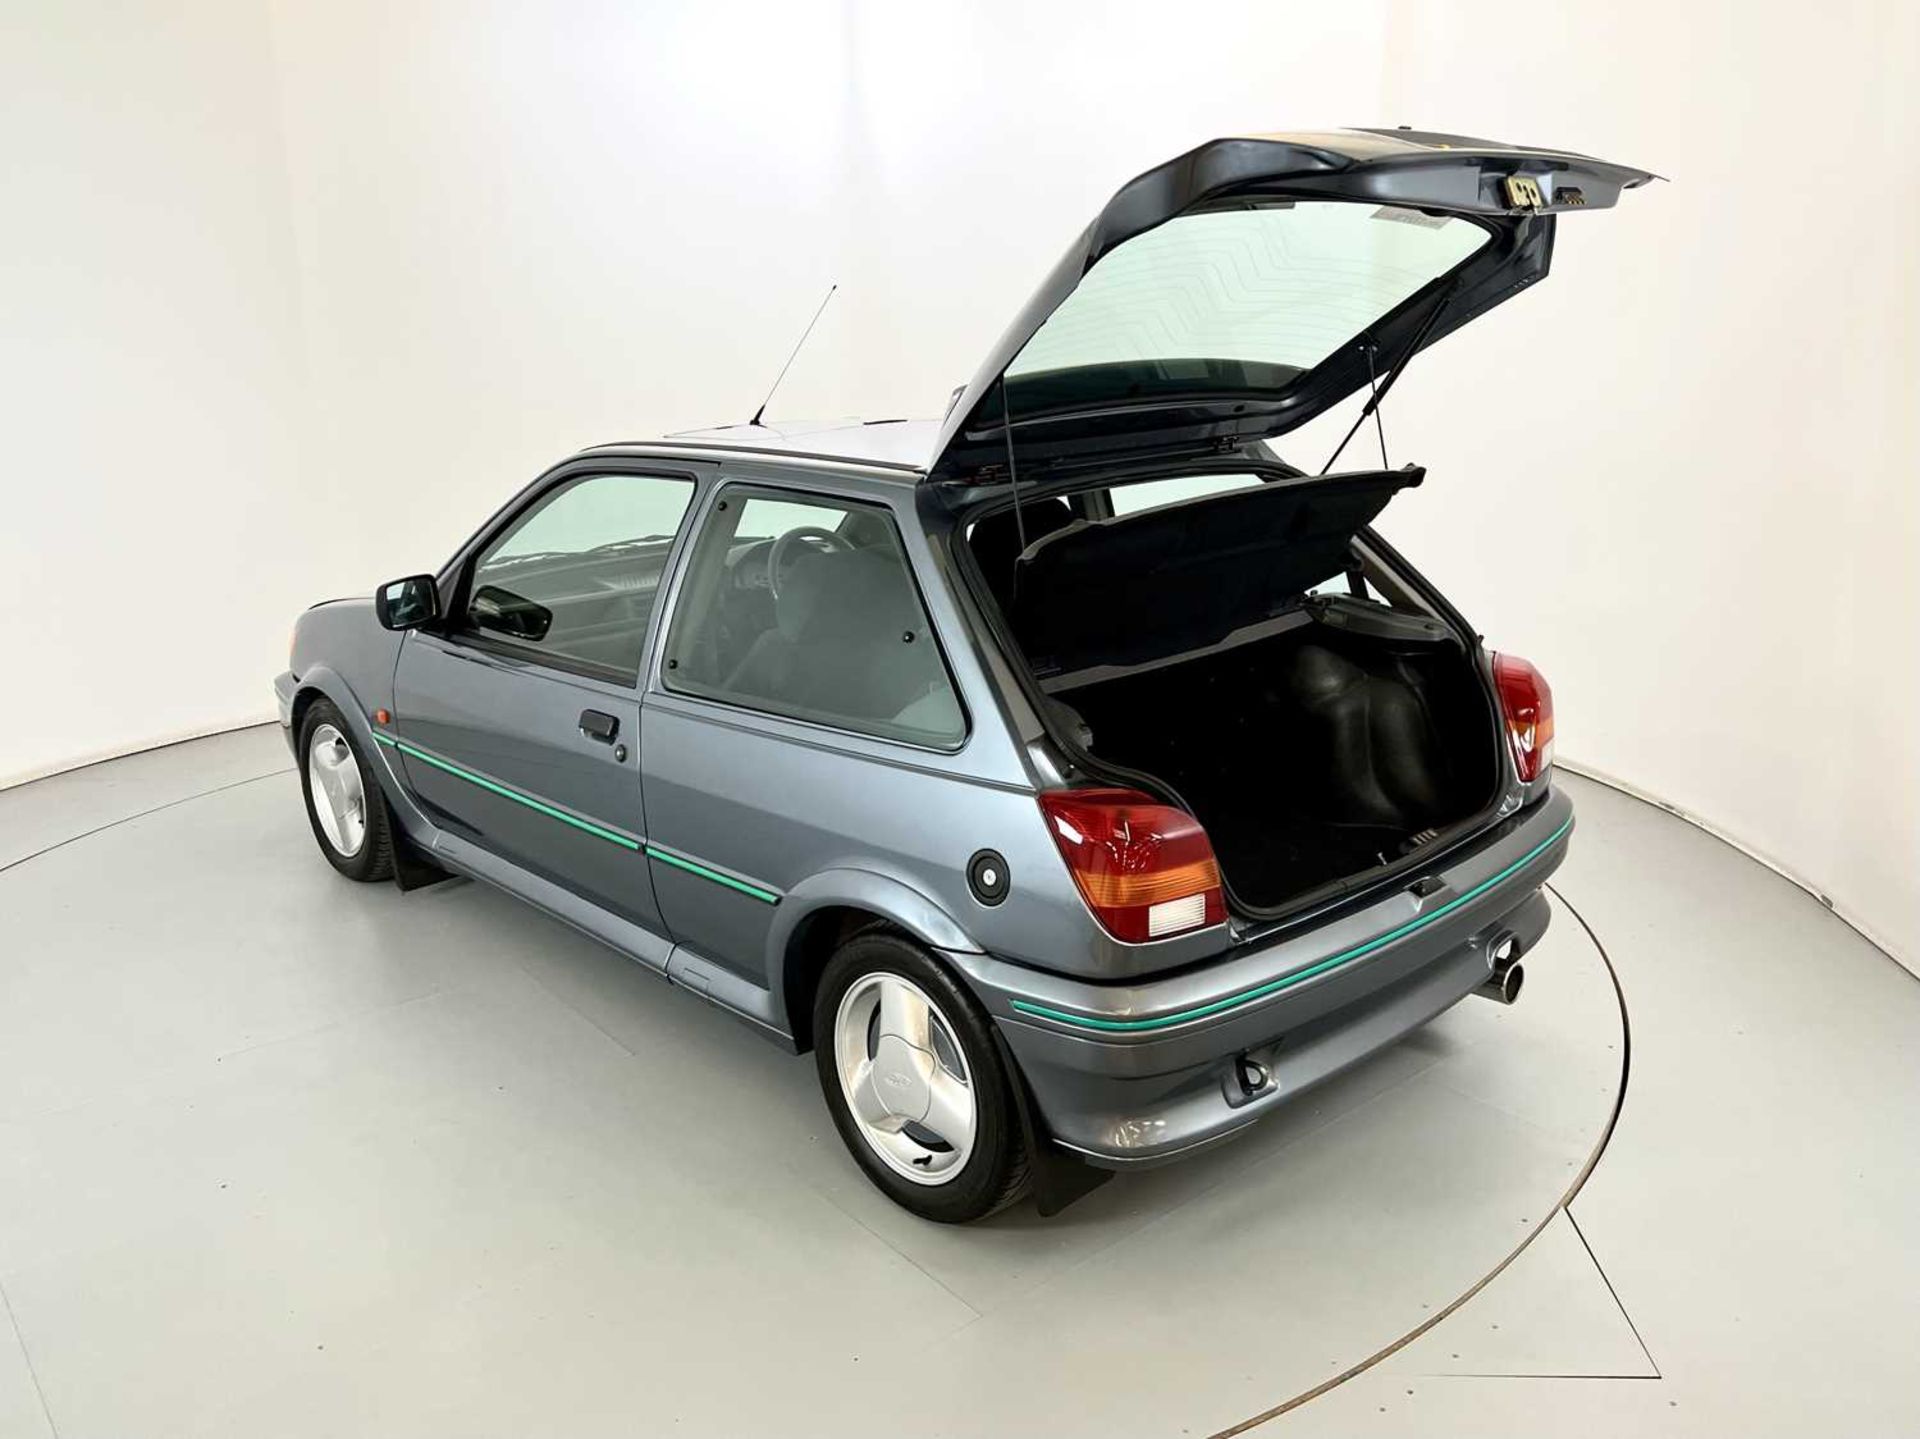 1991 Ford Fiesta RS Turbo - Image 28 of 32